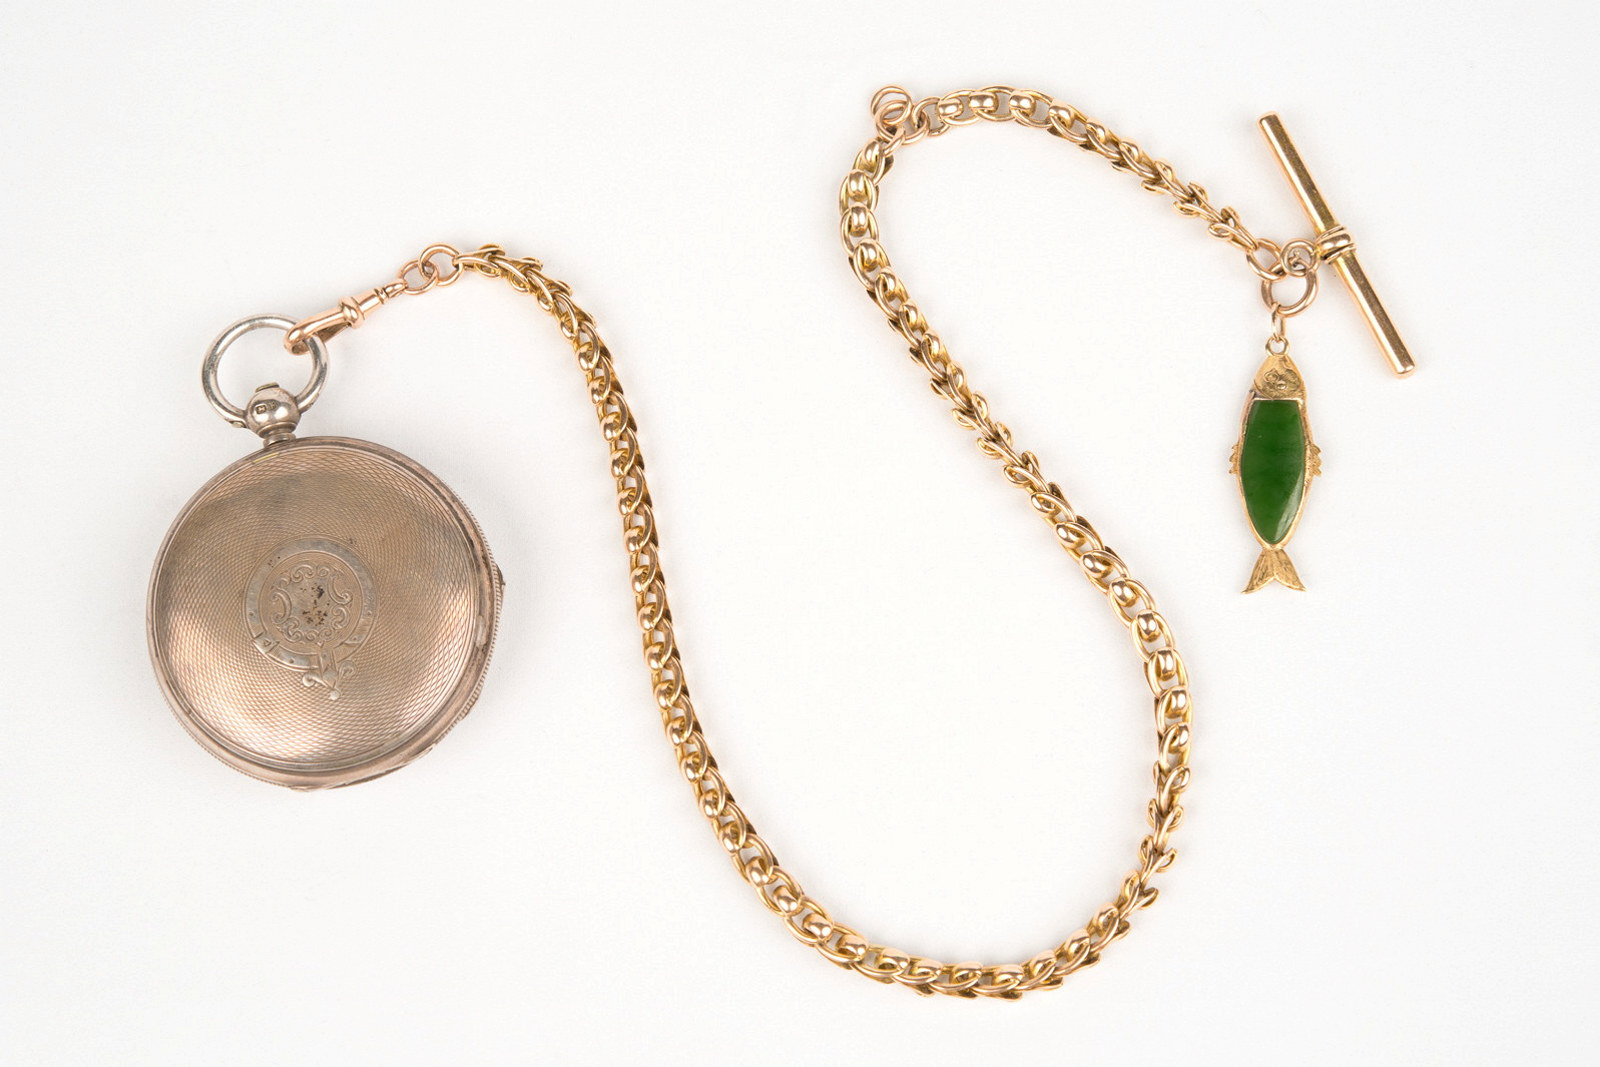 Pocket watch and watch chain with small jade fish attached, owned by Hugo Youngein who operated shop at Susannah Place